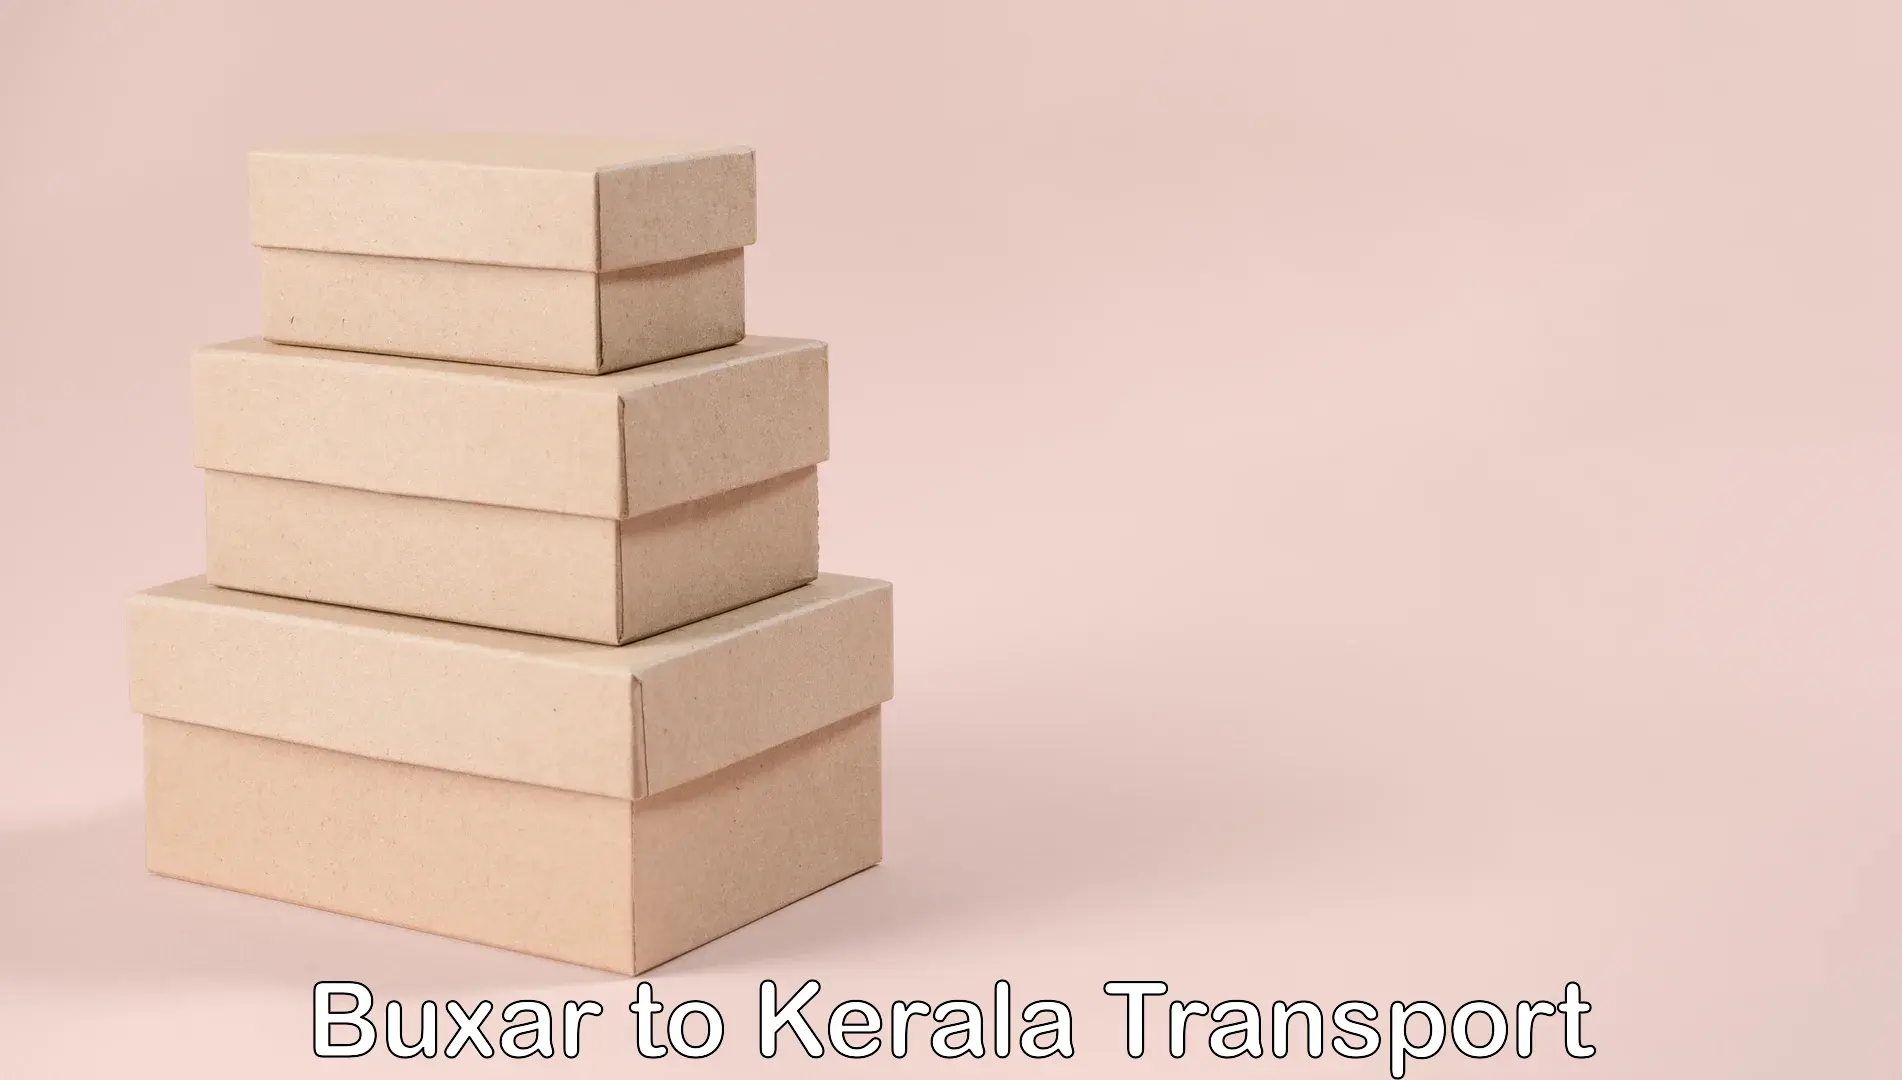 Domestic goods transportation services Buxar to Cochin